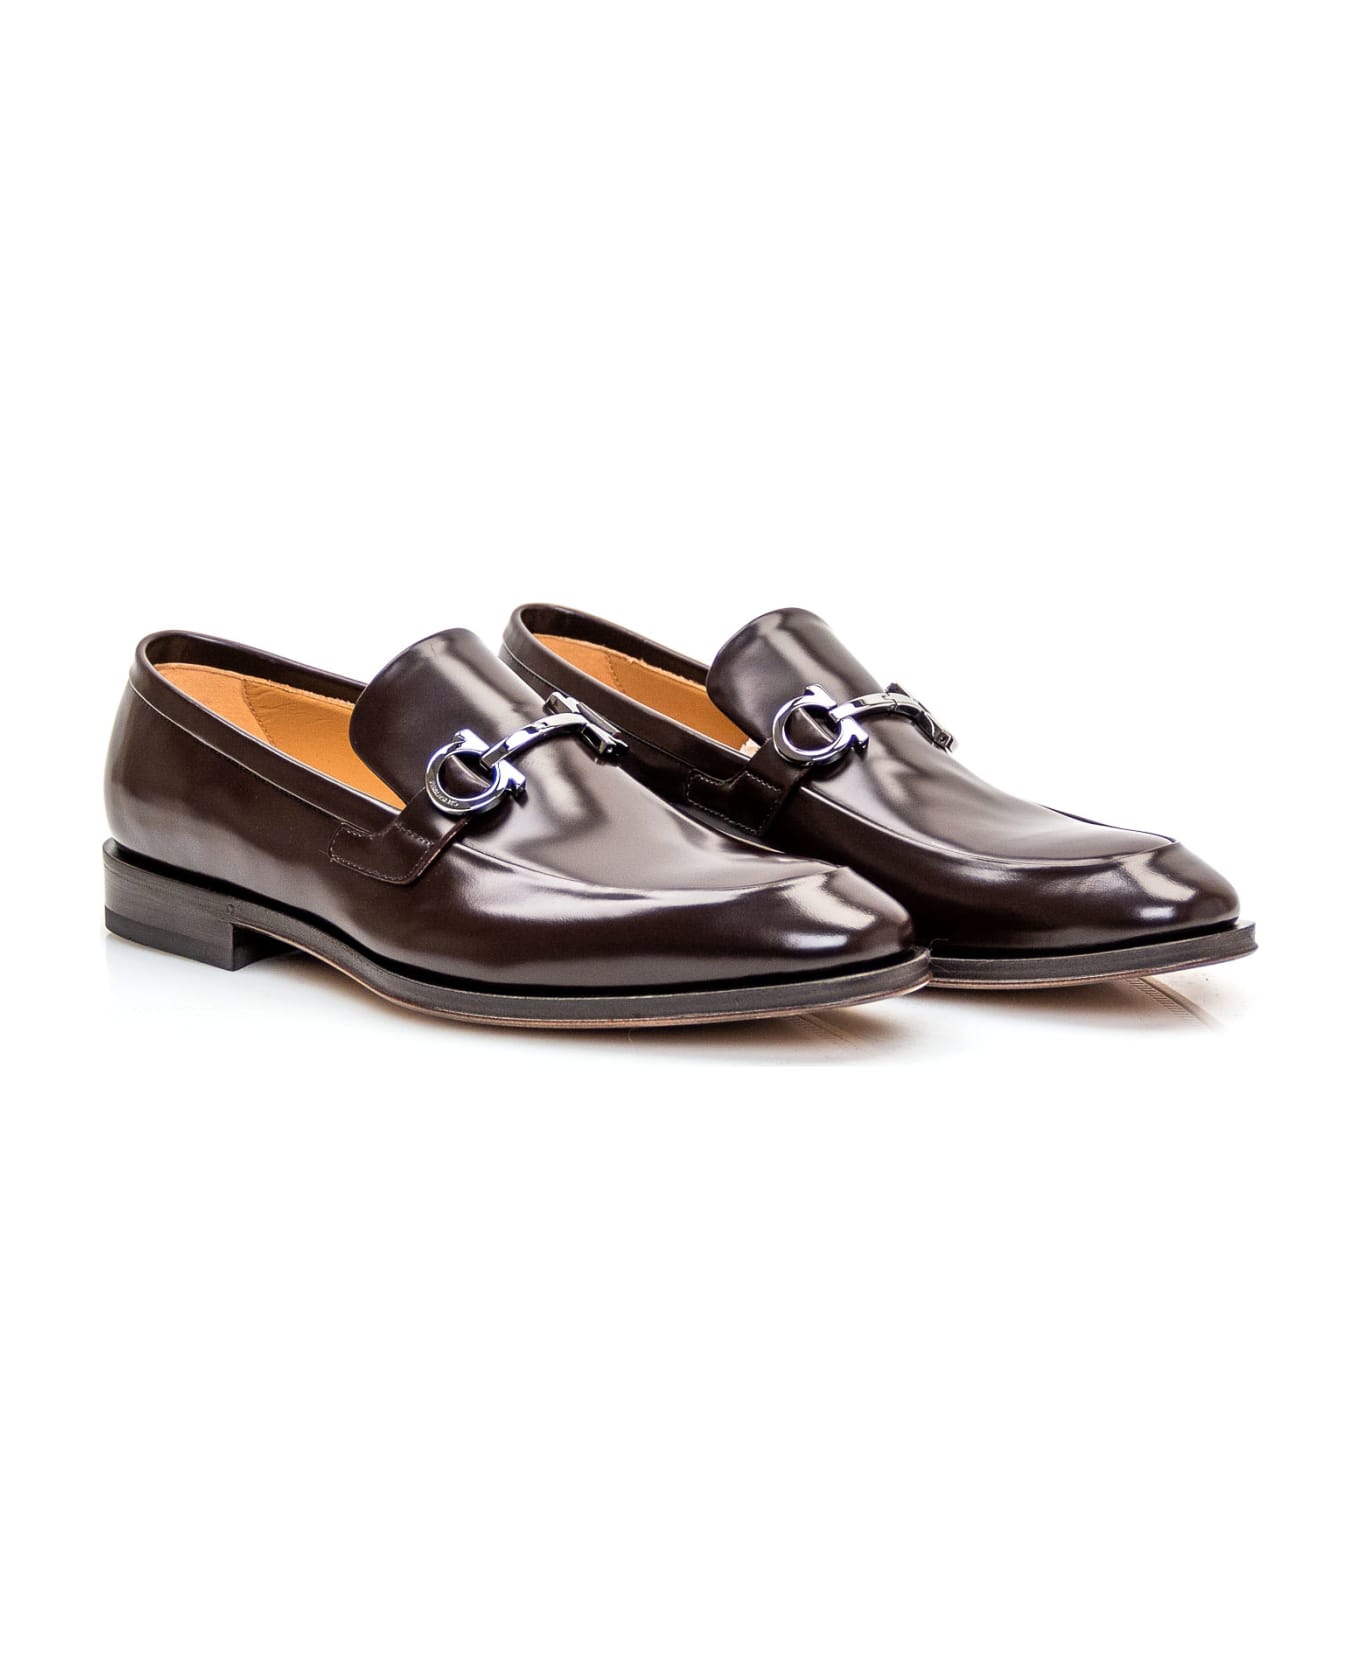 Ferragamo Loafer With Hook Ornament - HICKORY ローファー＆デッキシューズ